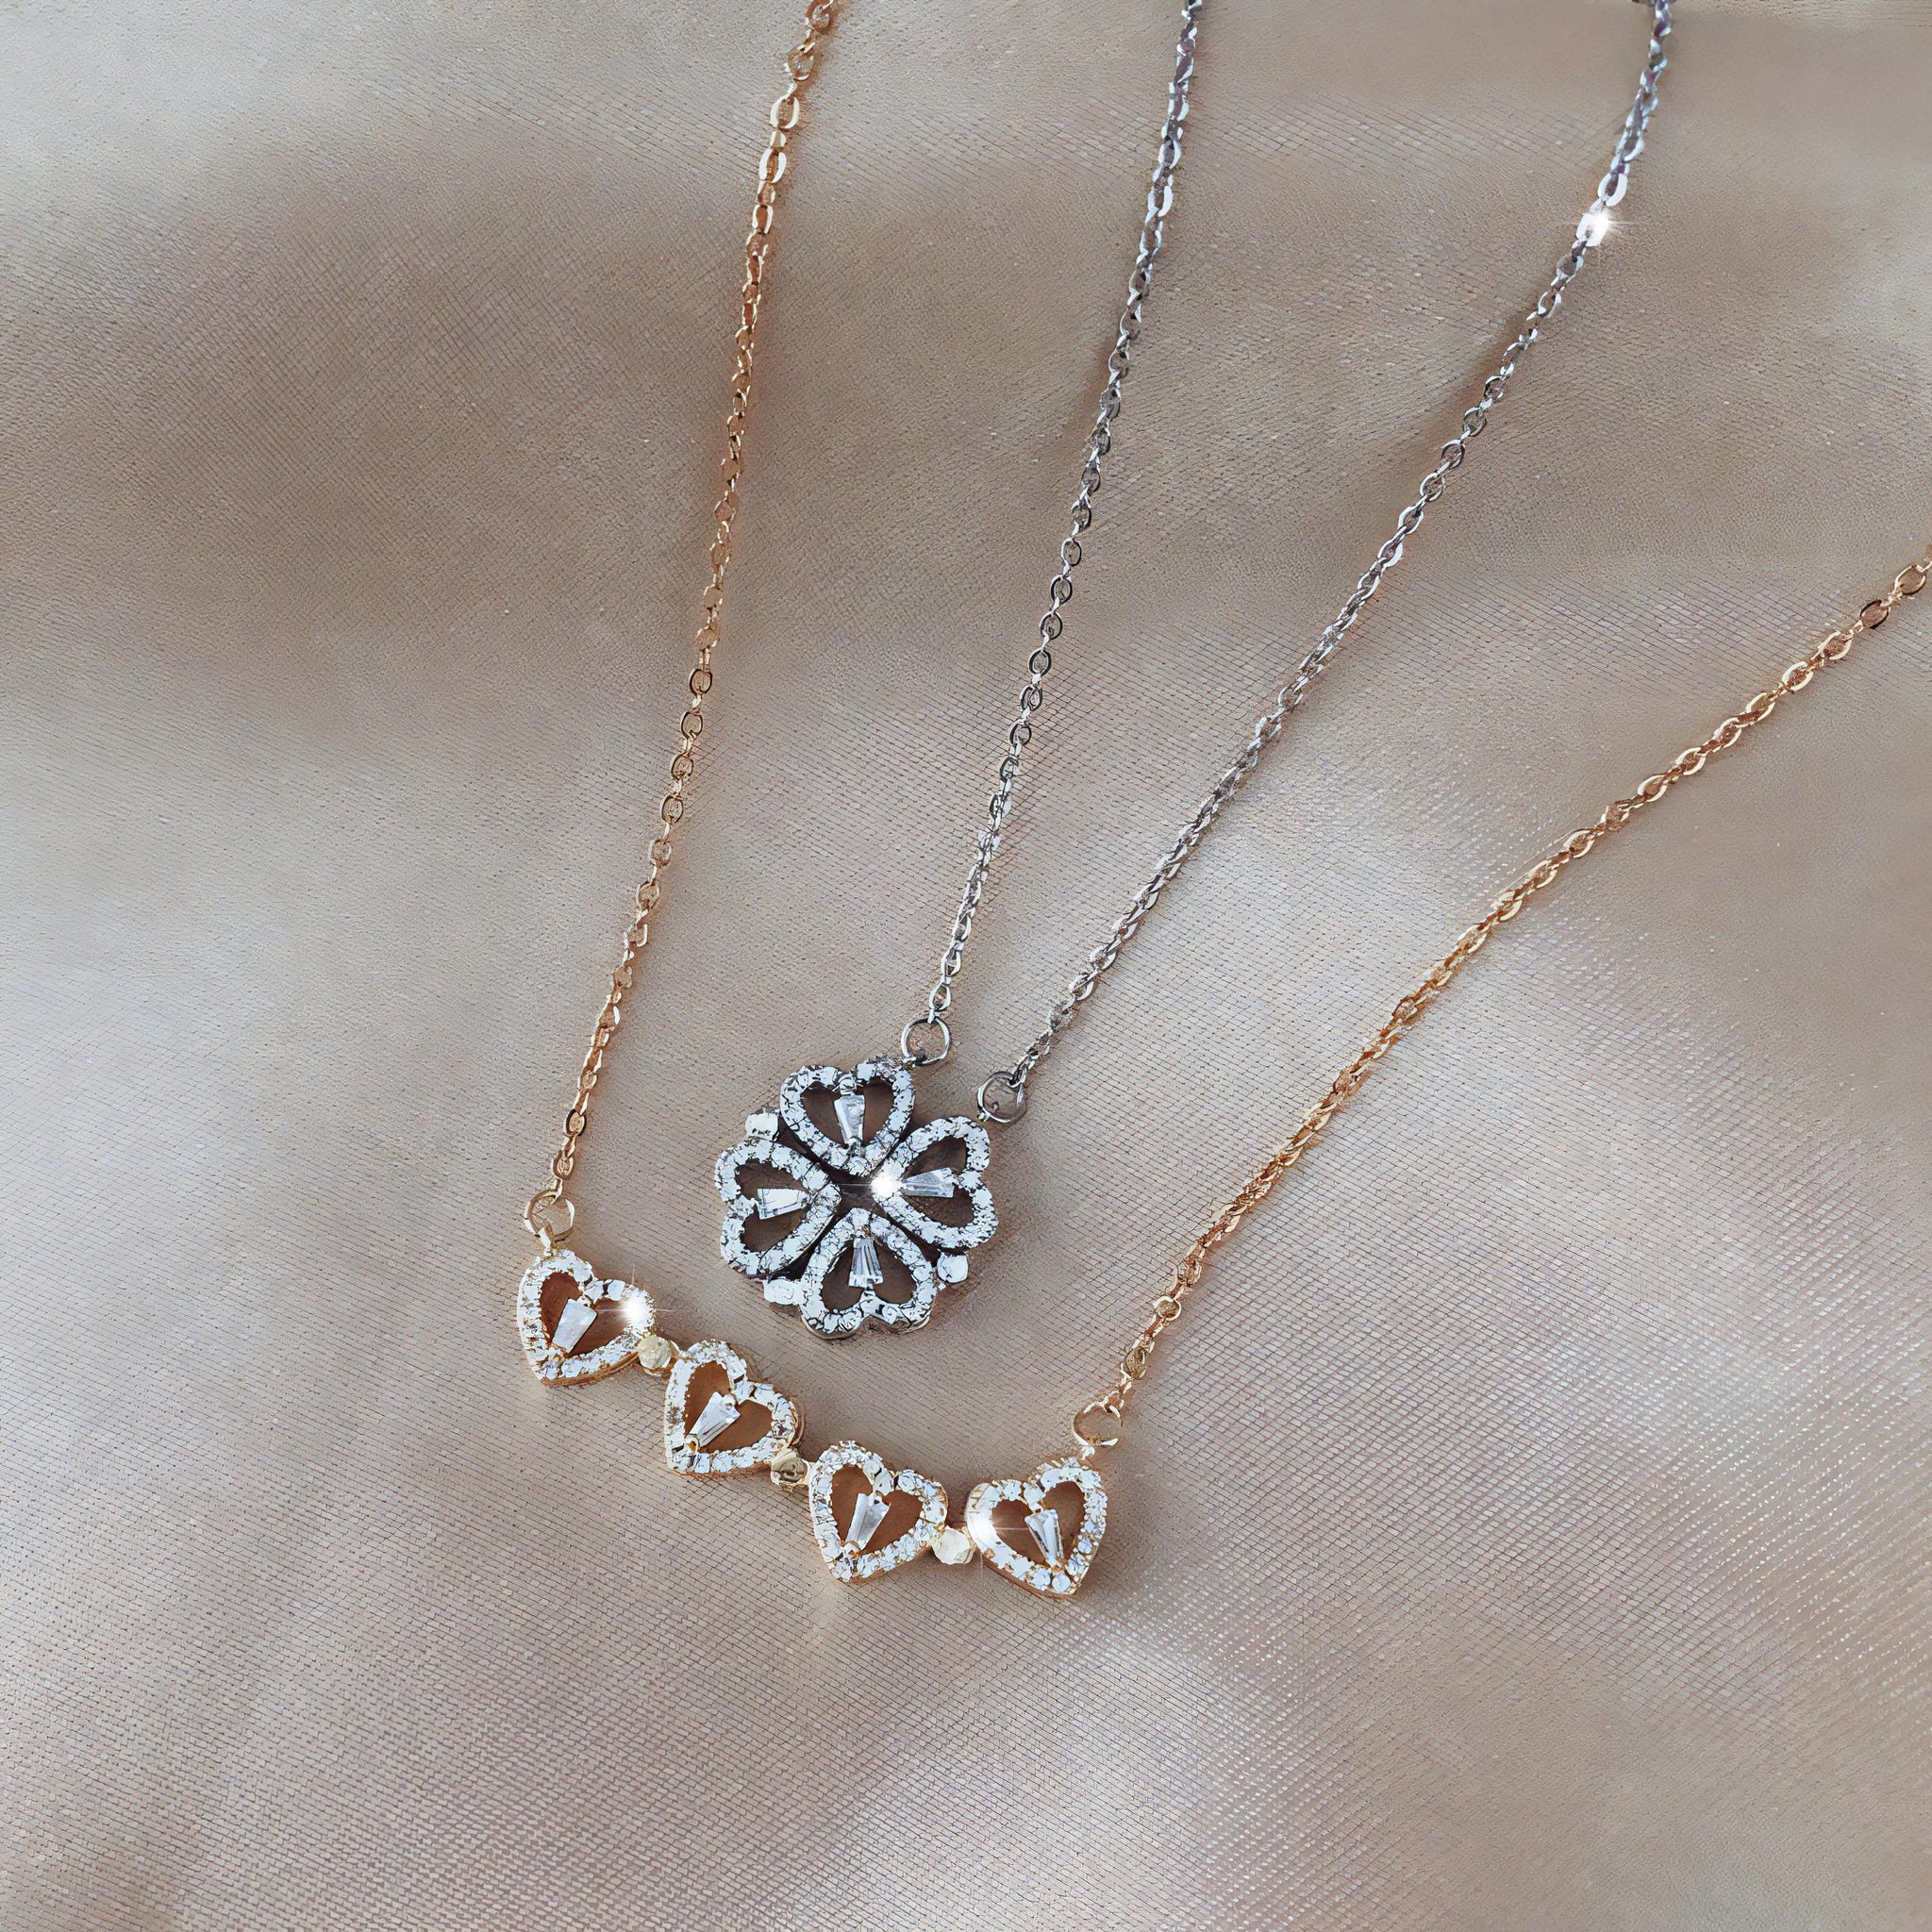 Four Hearts Clover Necklace